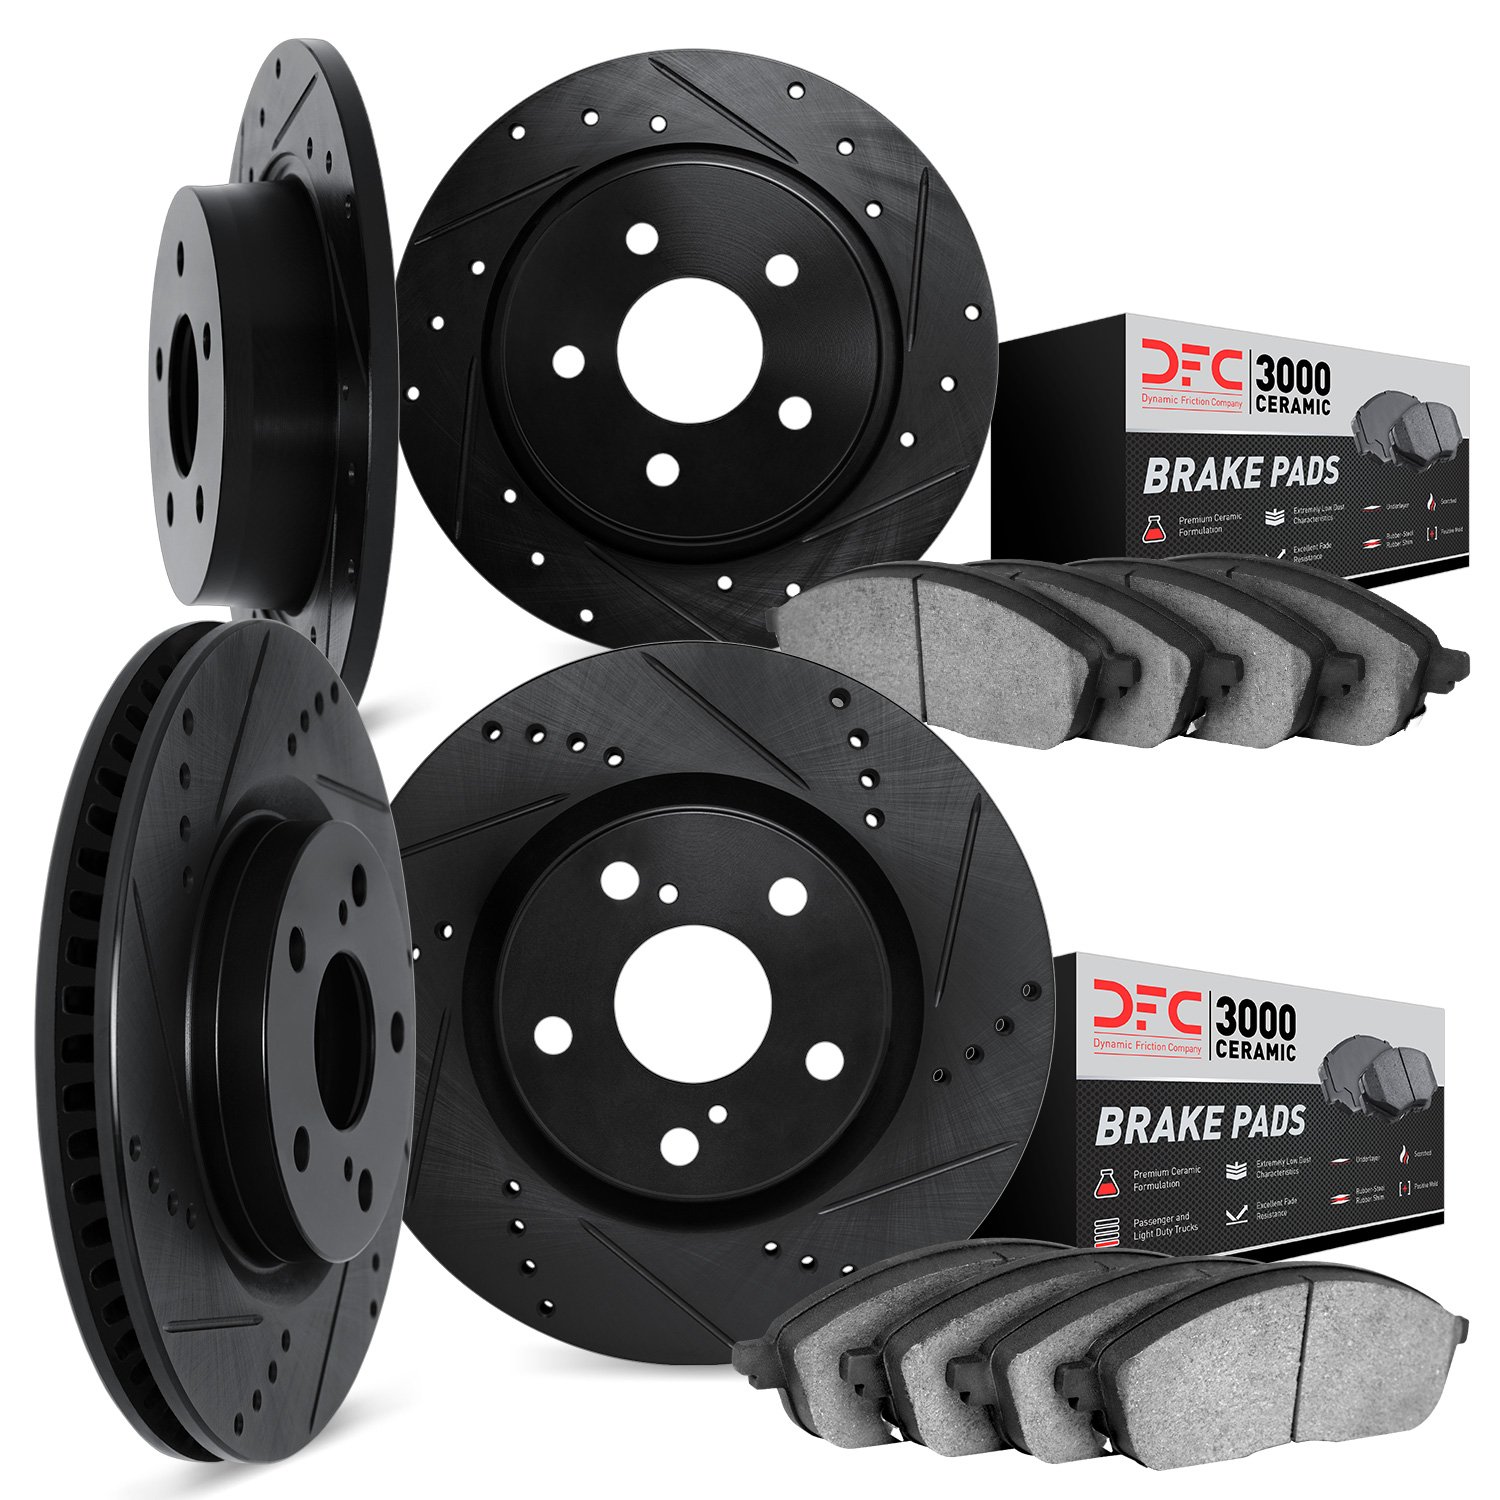 8304-58017 Drilled/Slotted Brake Rotors with 3000-Series Ceramic Brake Pads Kit [Black], 2013-2018 Acura/Honda, Position: Front